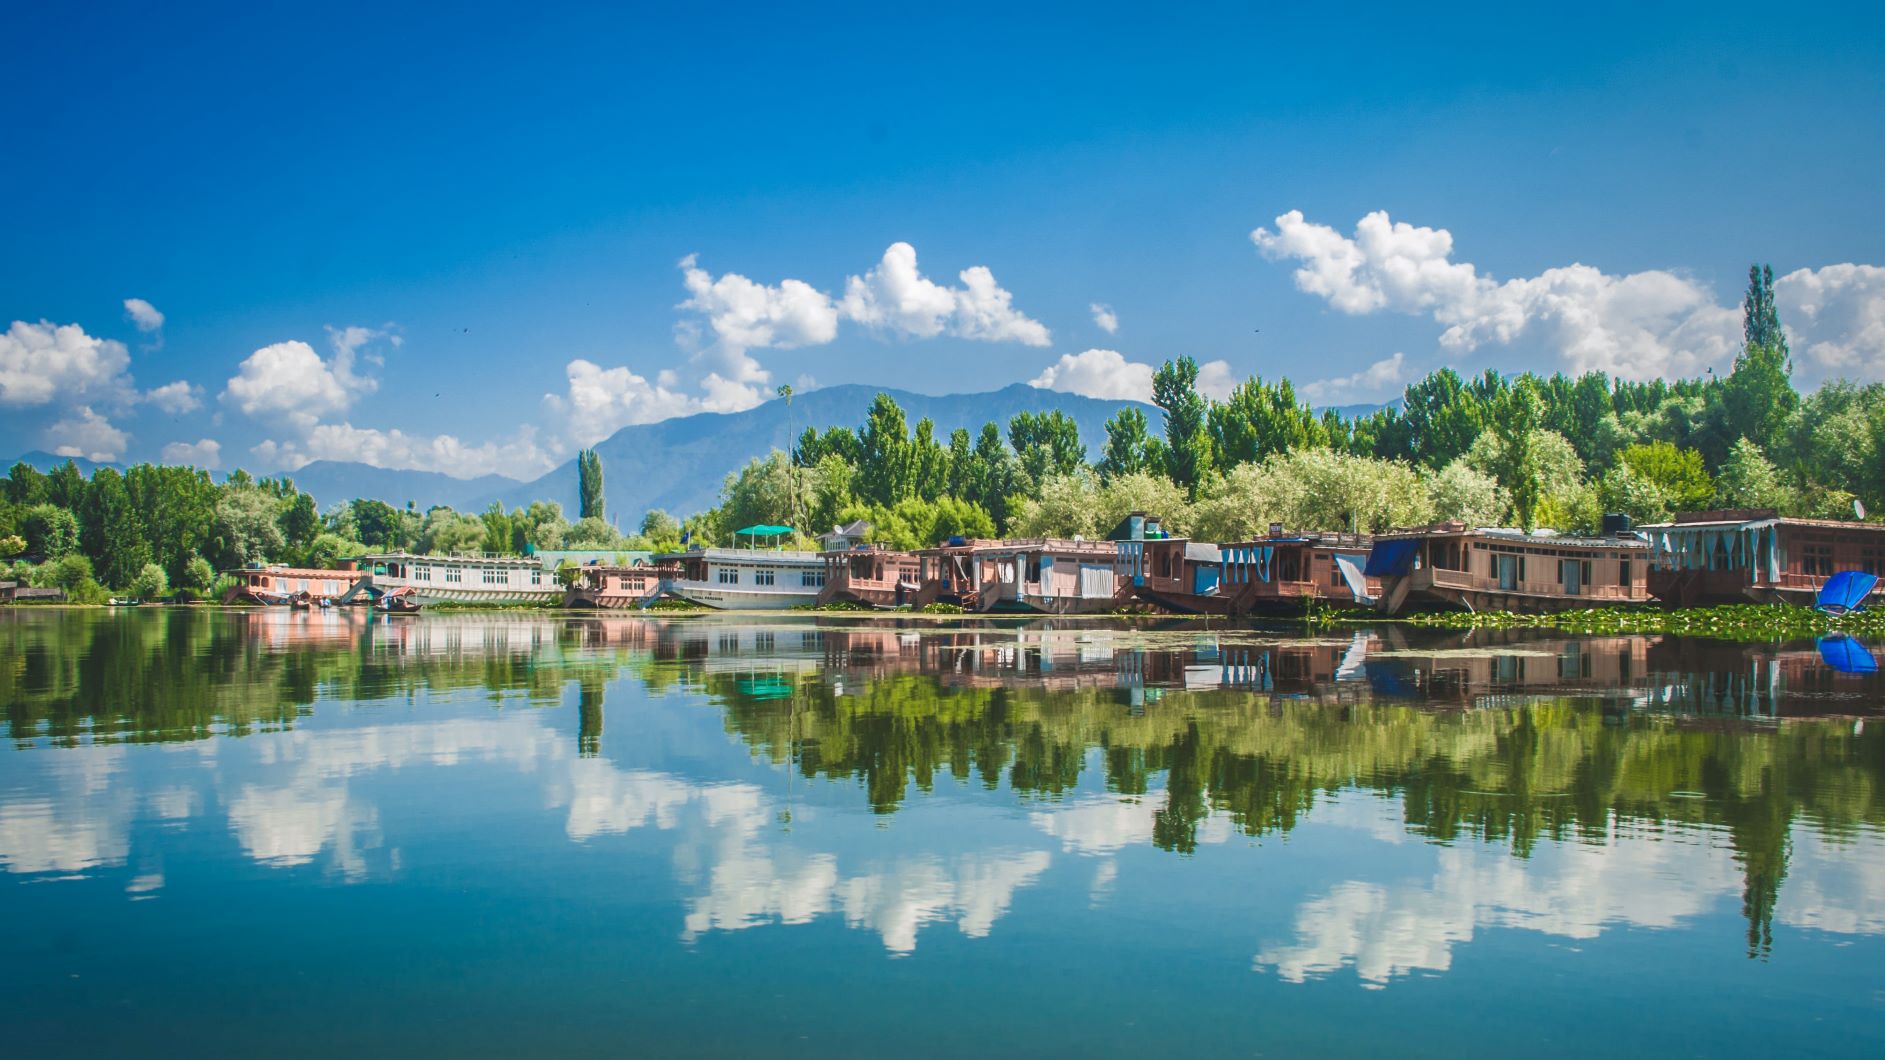 The City of Lakes - 6 Enticing Top Places to Visit in Srinagar